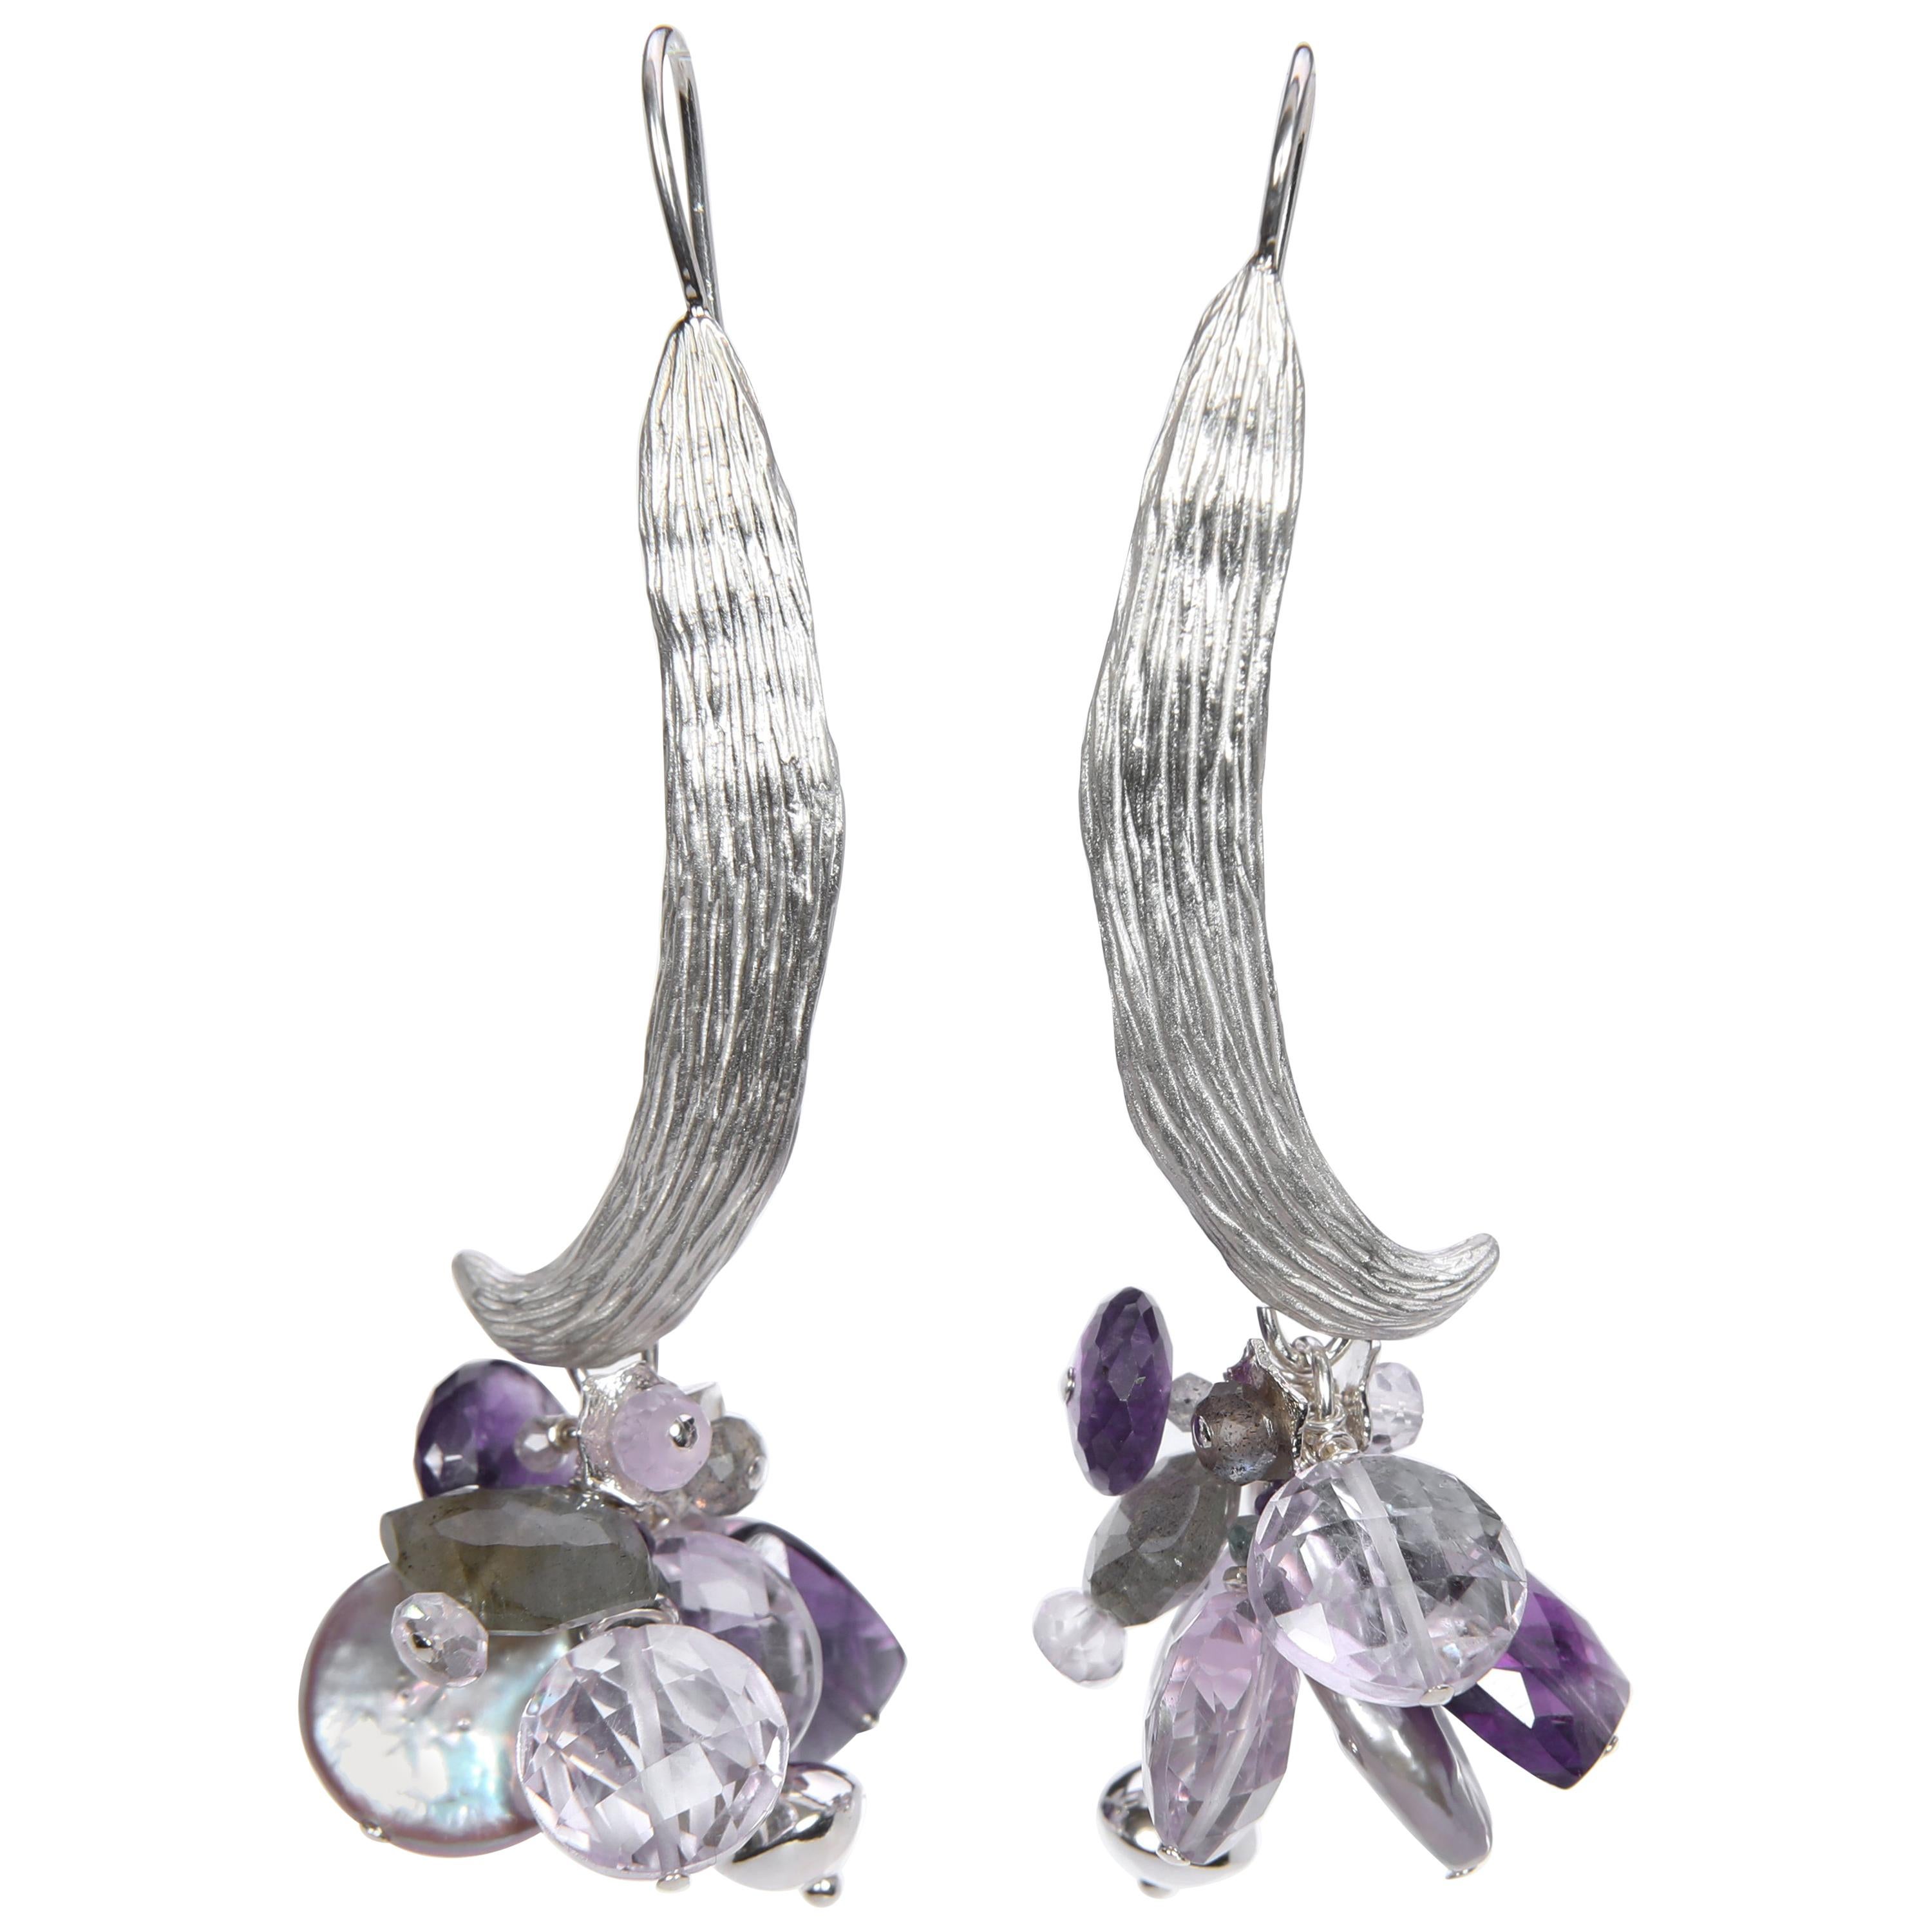 Dangle Ear Wires: Amethyst, Pearls, Labradorite, and Silver